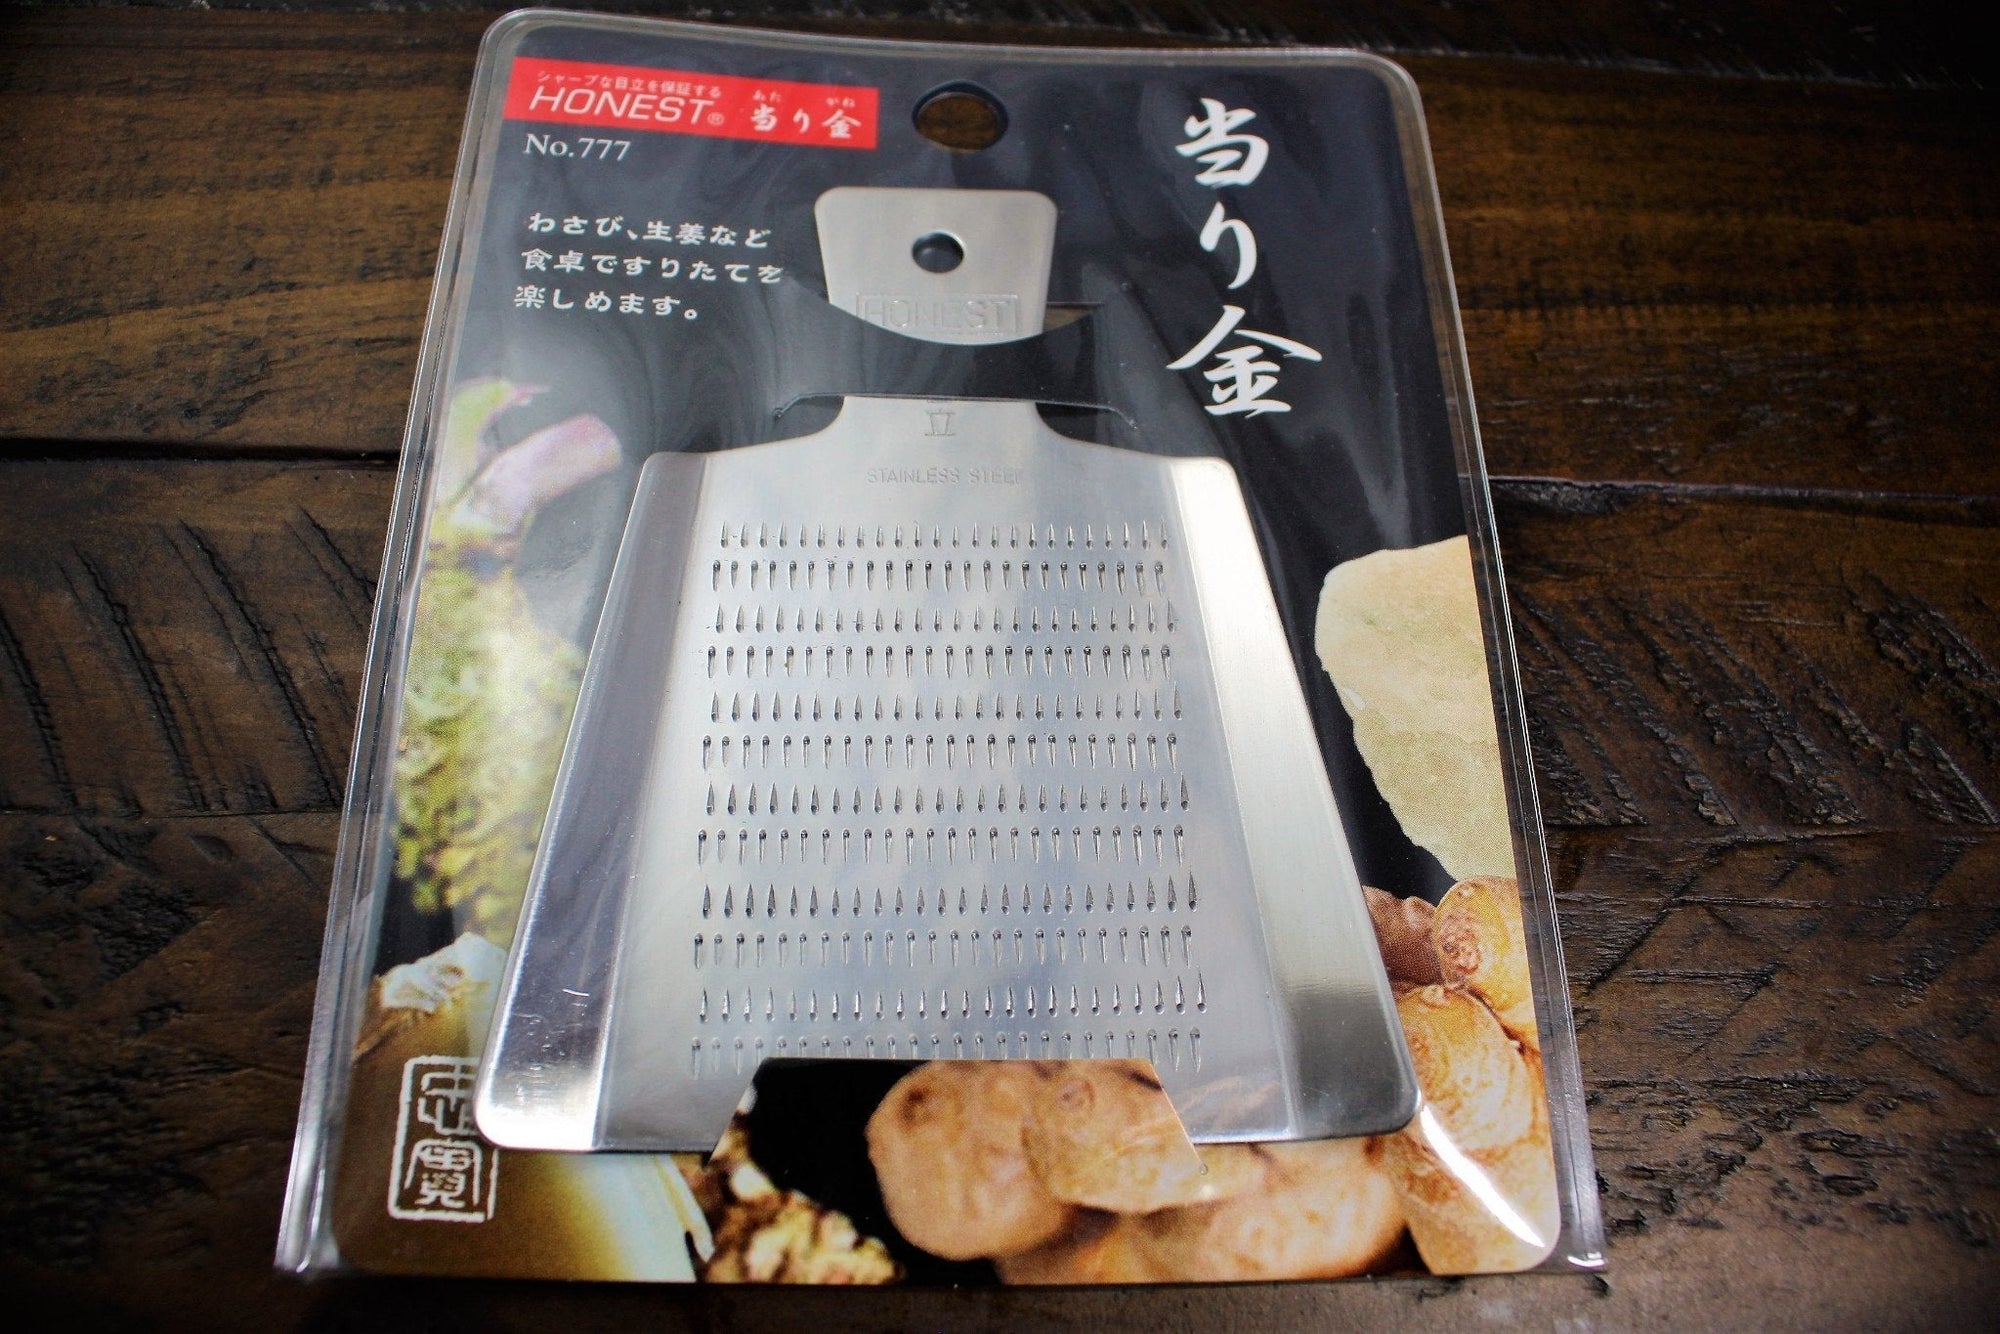 Accessories - Stainless Steel Japanese Grater / Oroshigane Mini